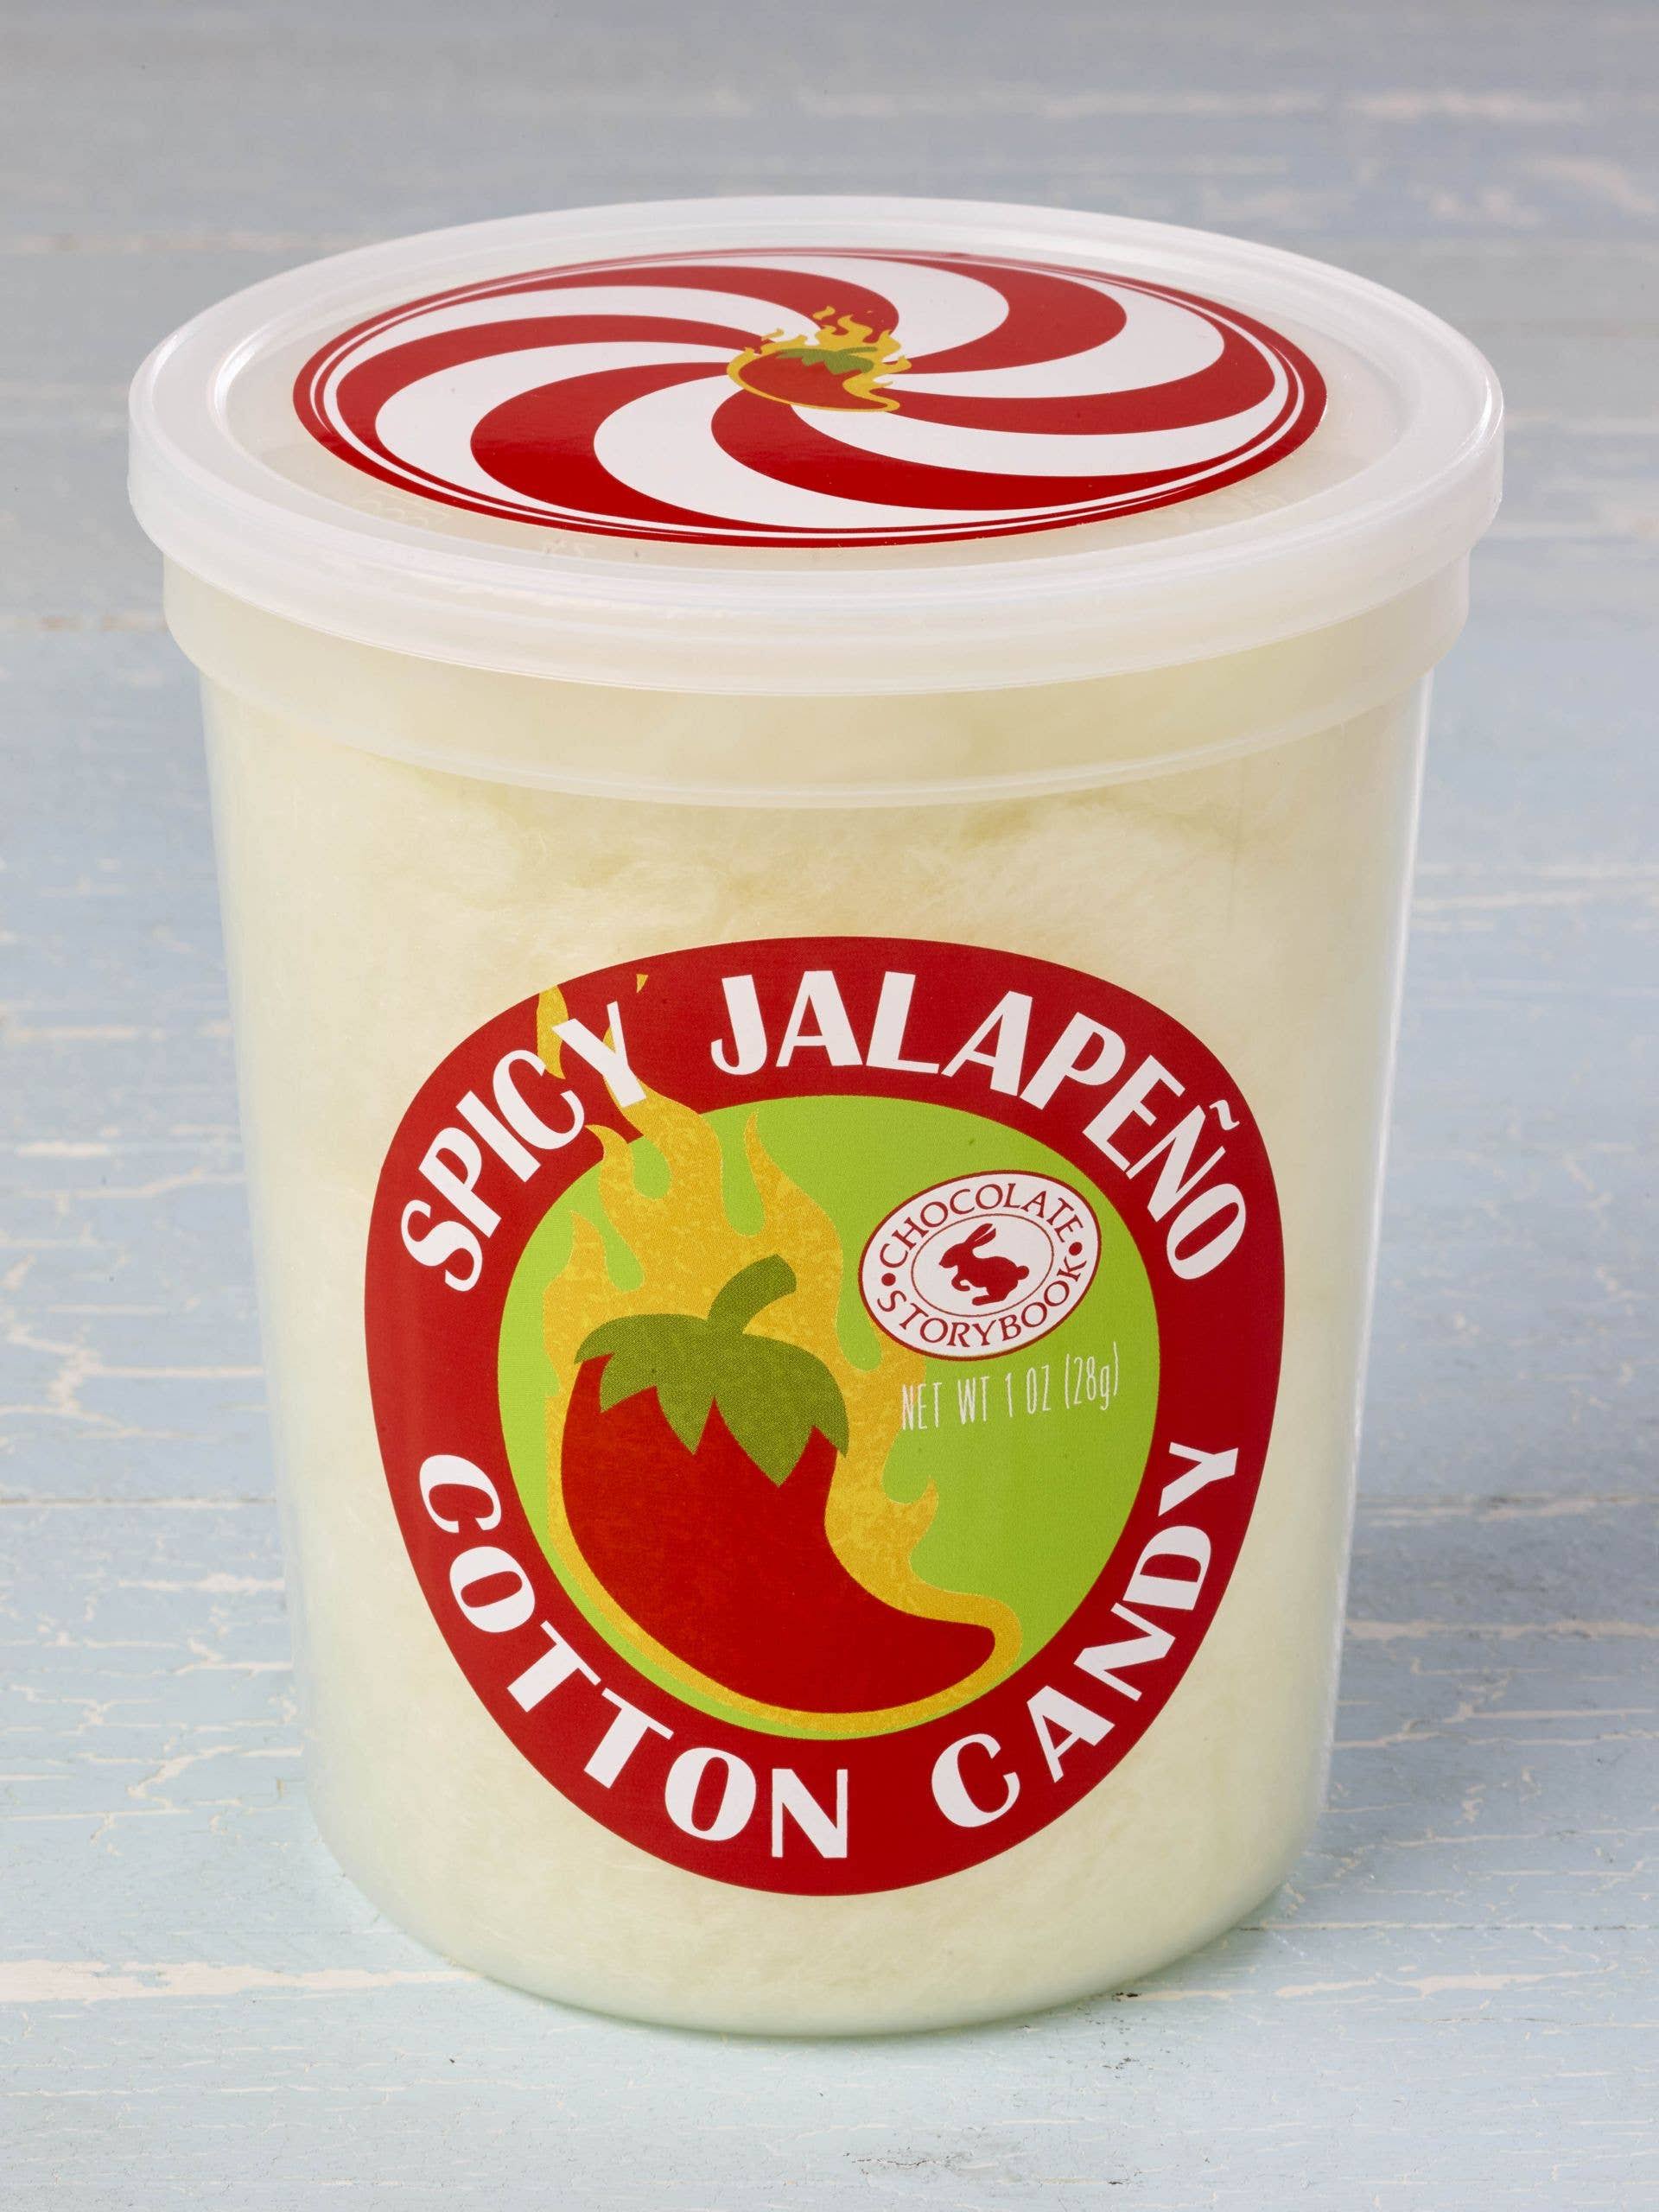 Cotton Candy - Spicy Jalapeno